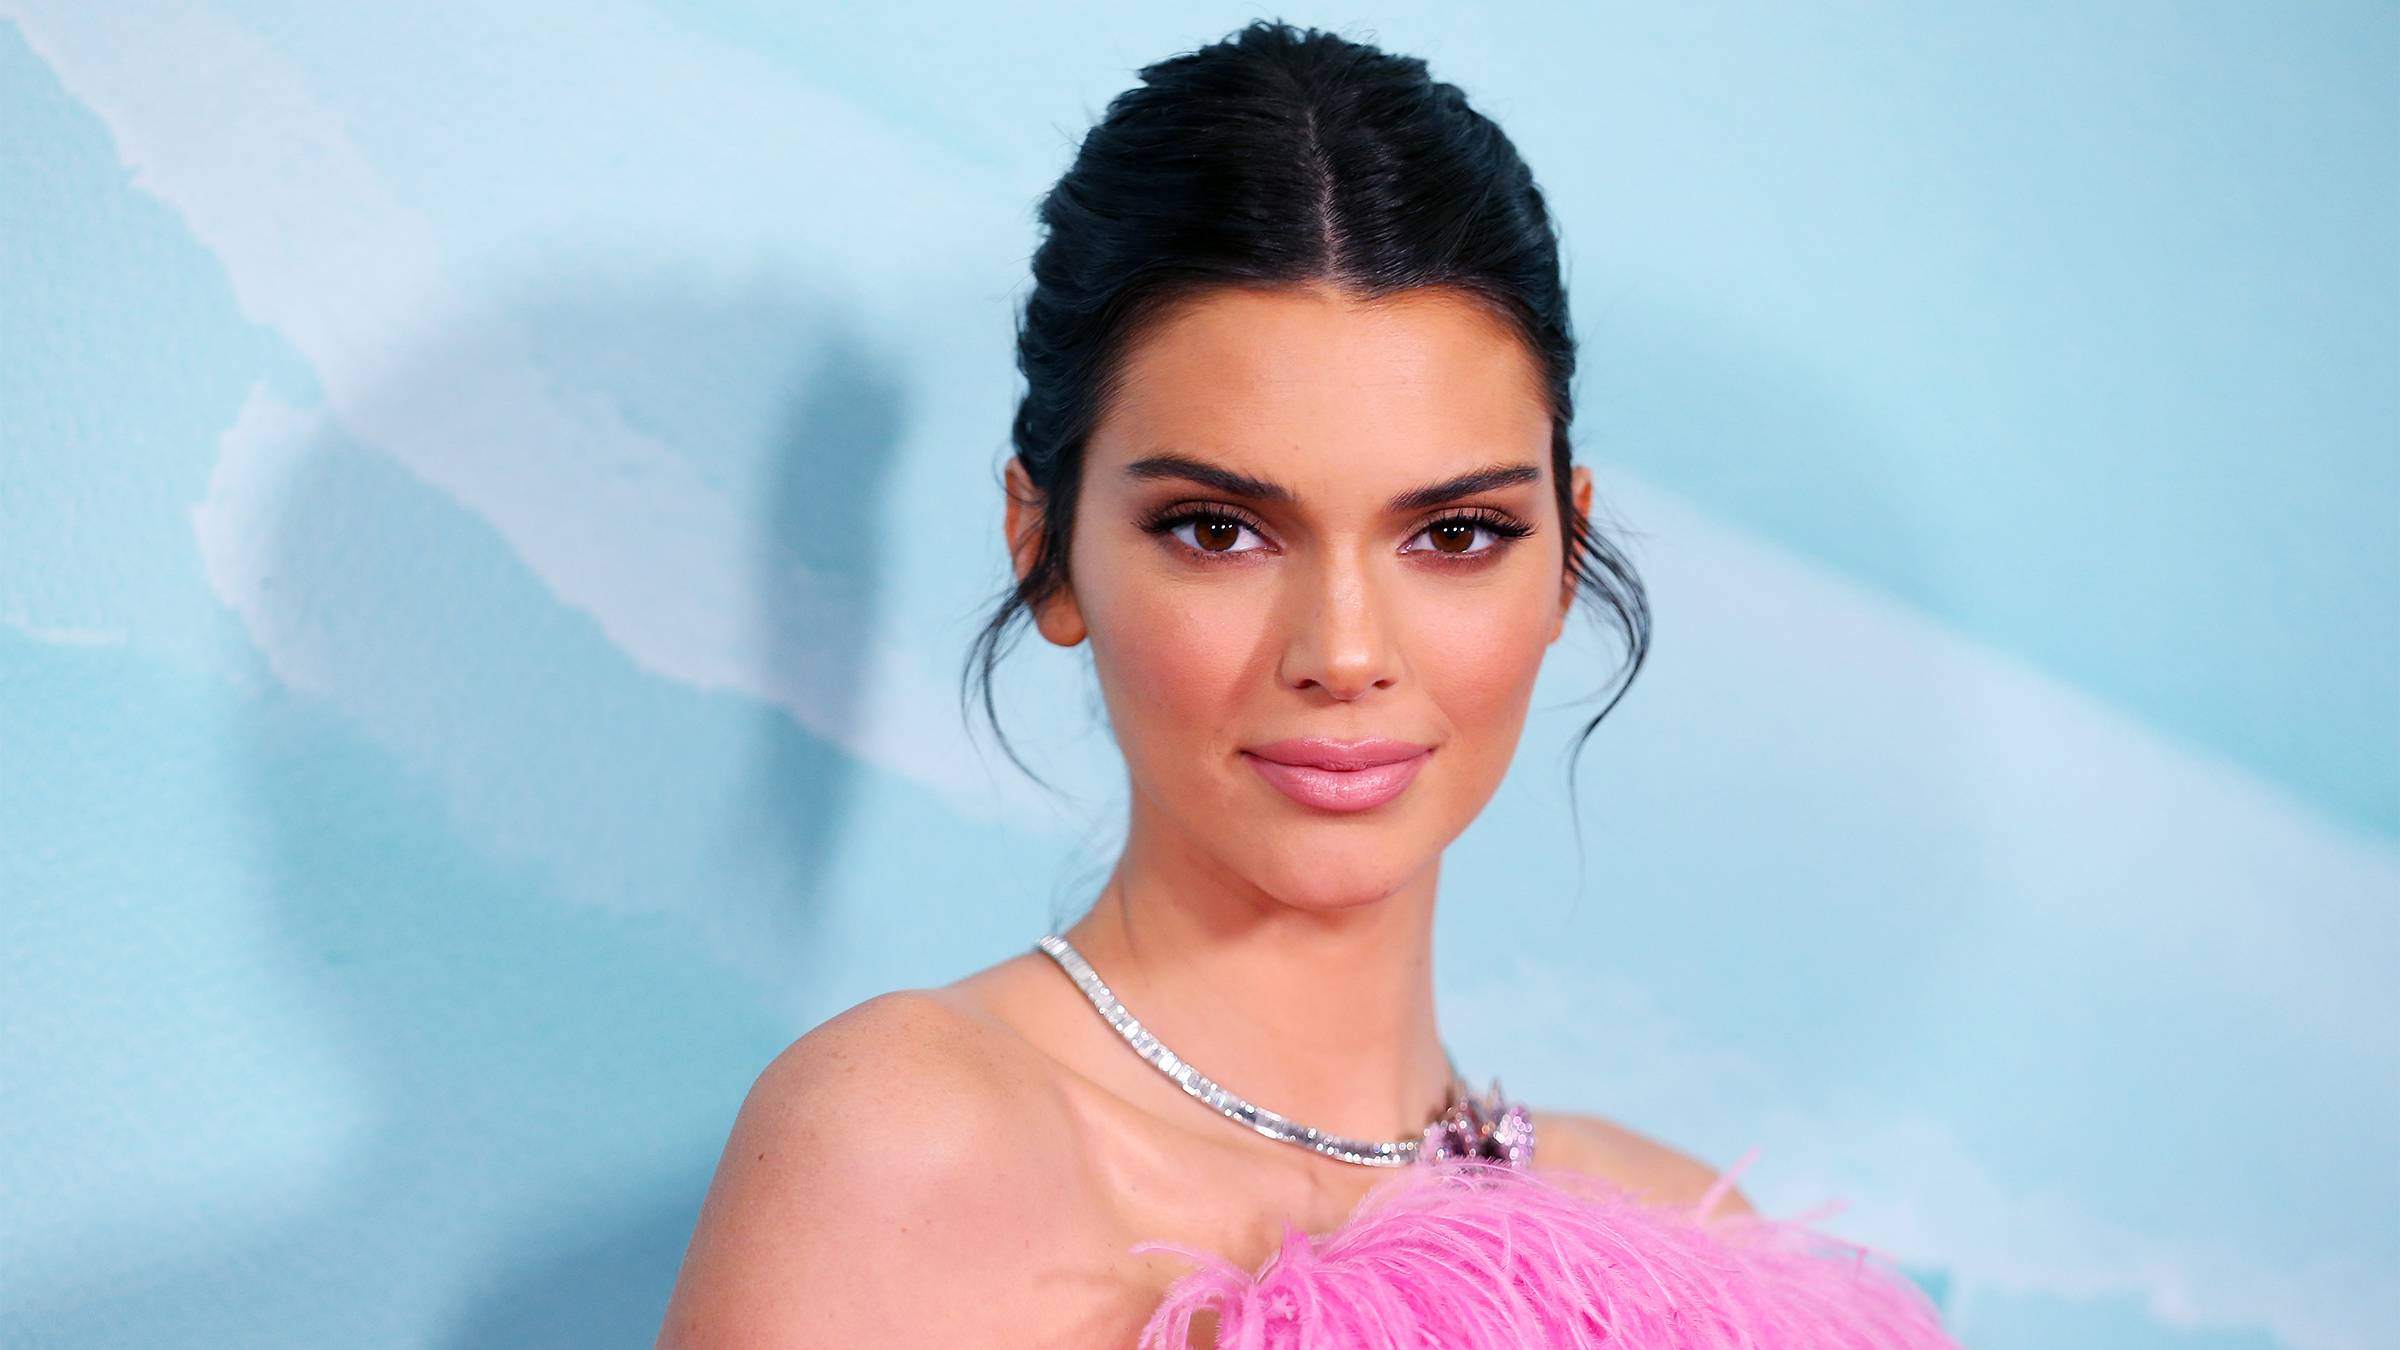 Kendall Jenner continues to go braless despite Calvin Klein underwear  contract – The Sun